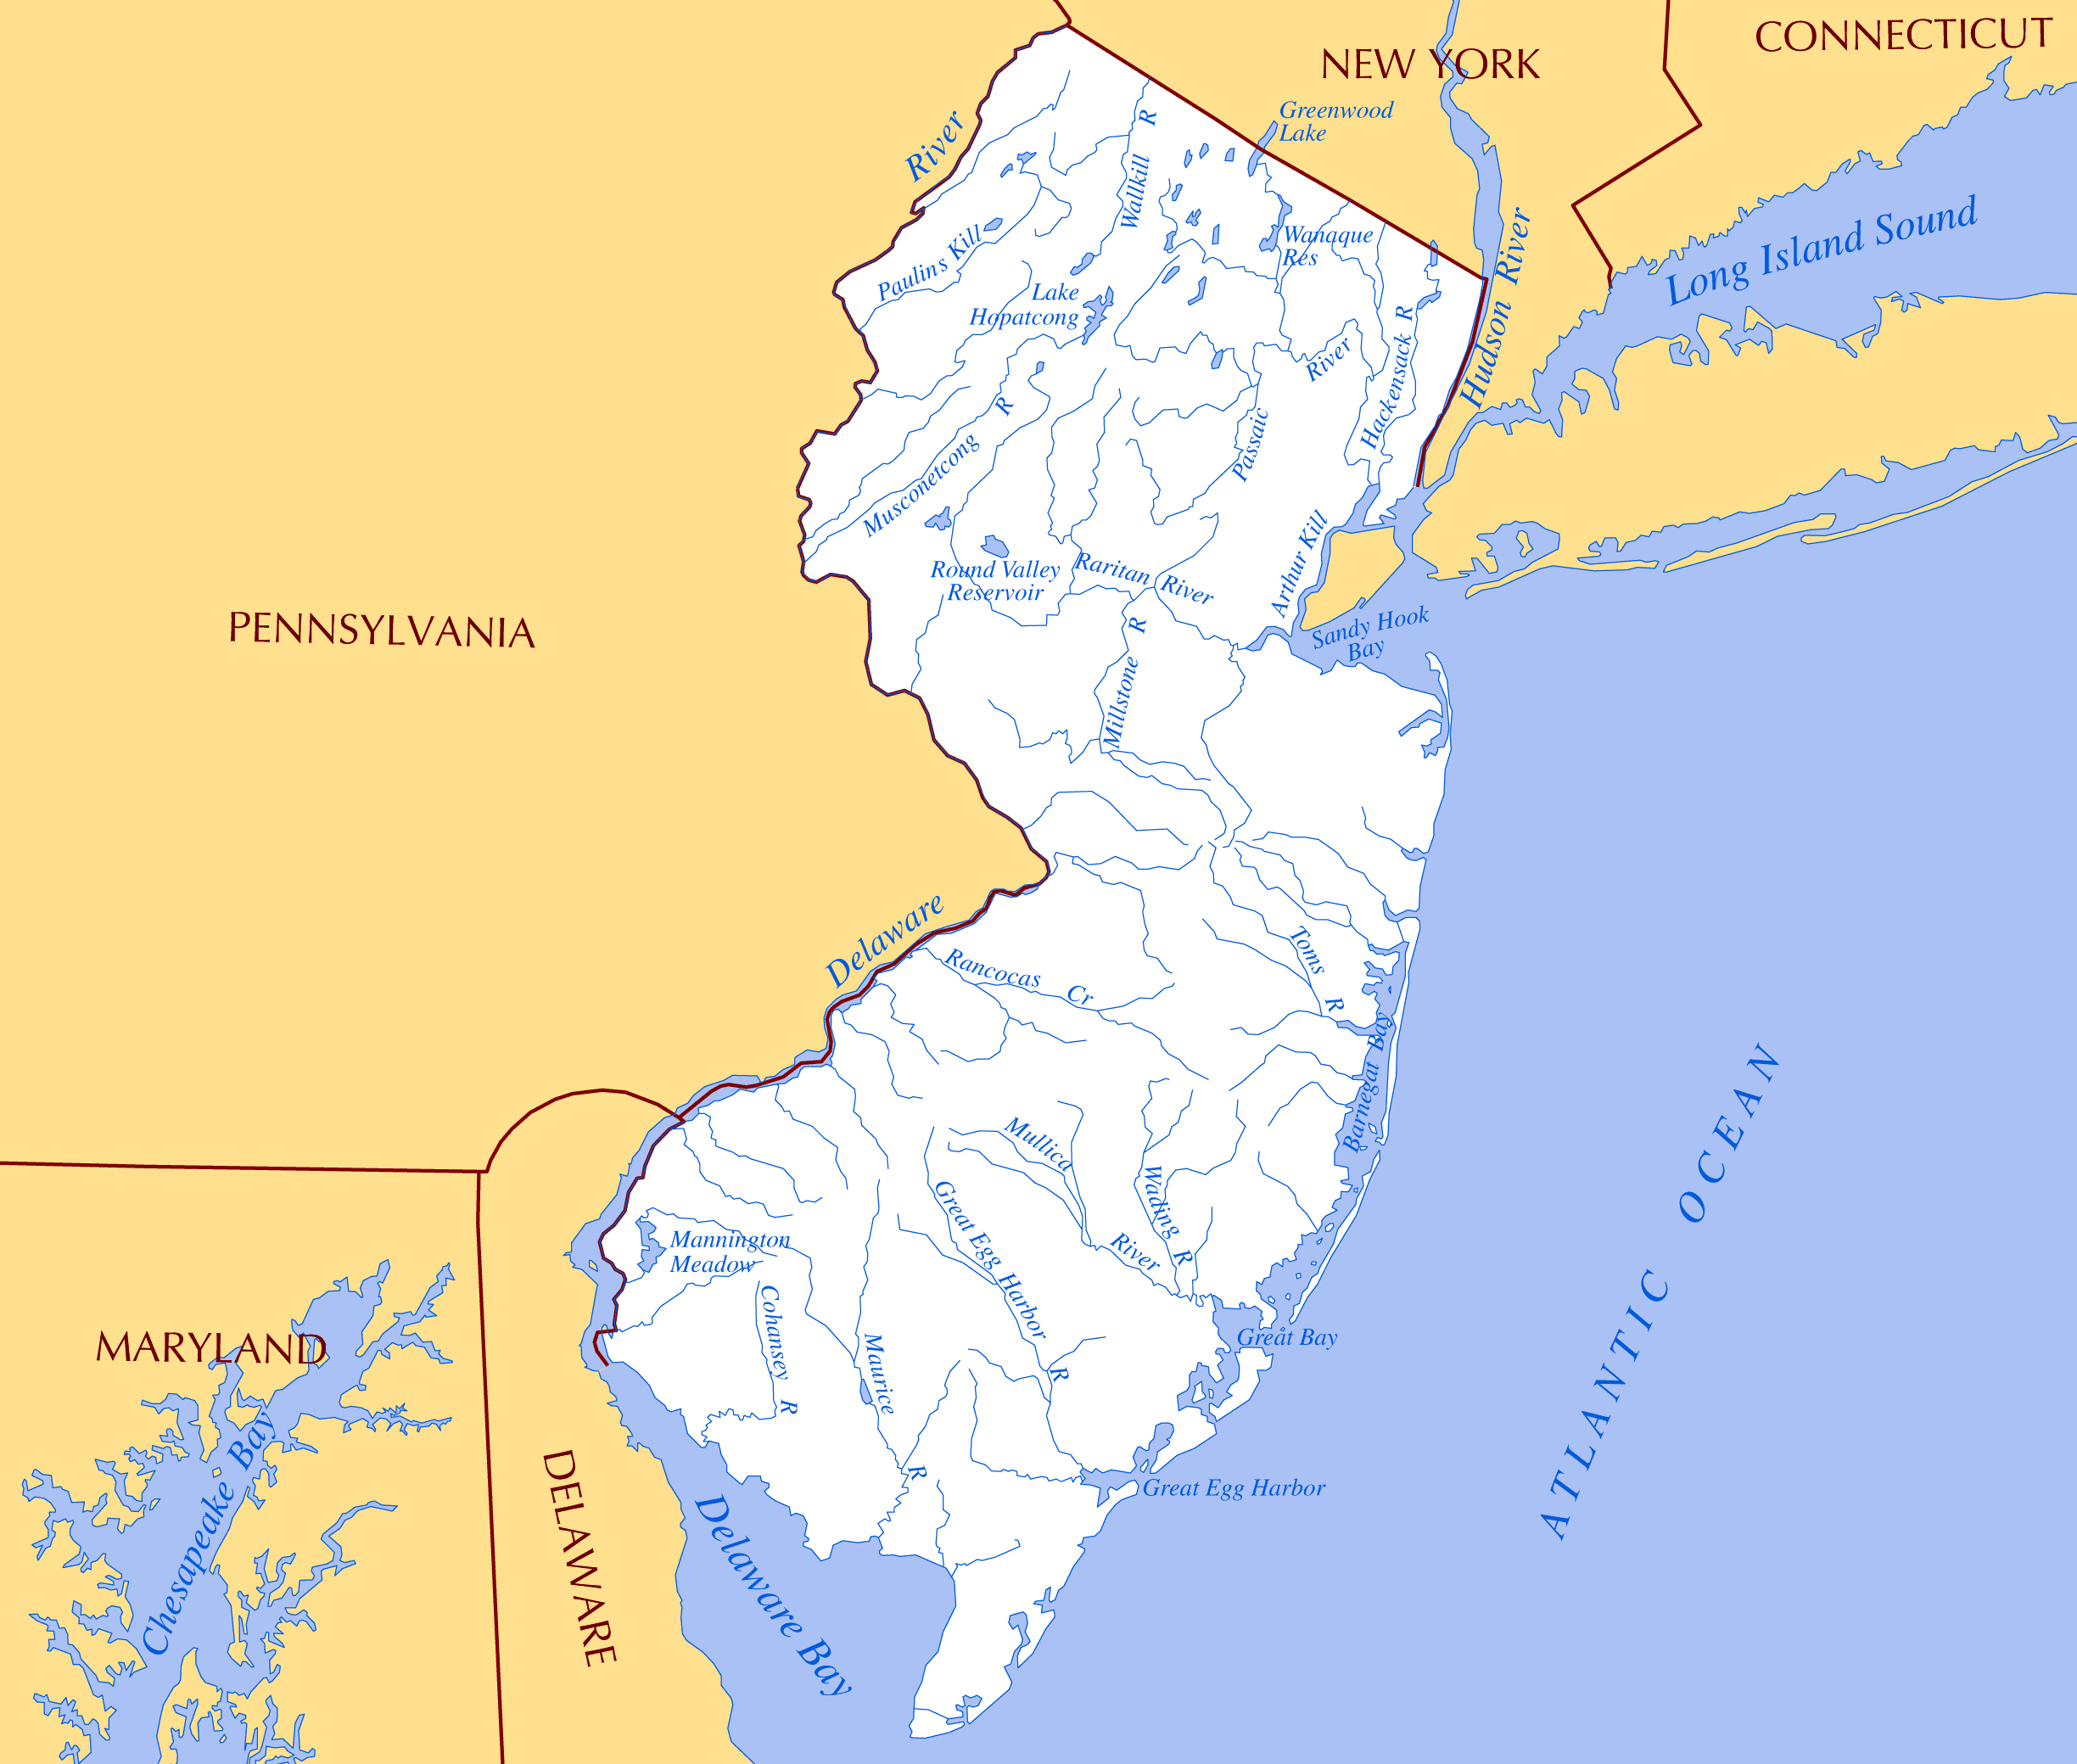 how big is the state of new jersey